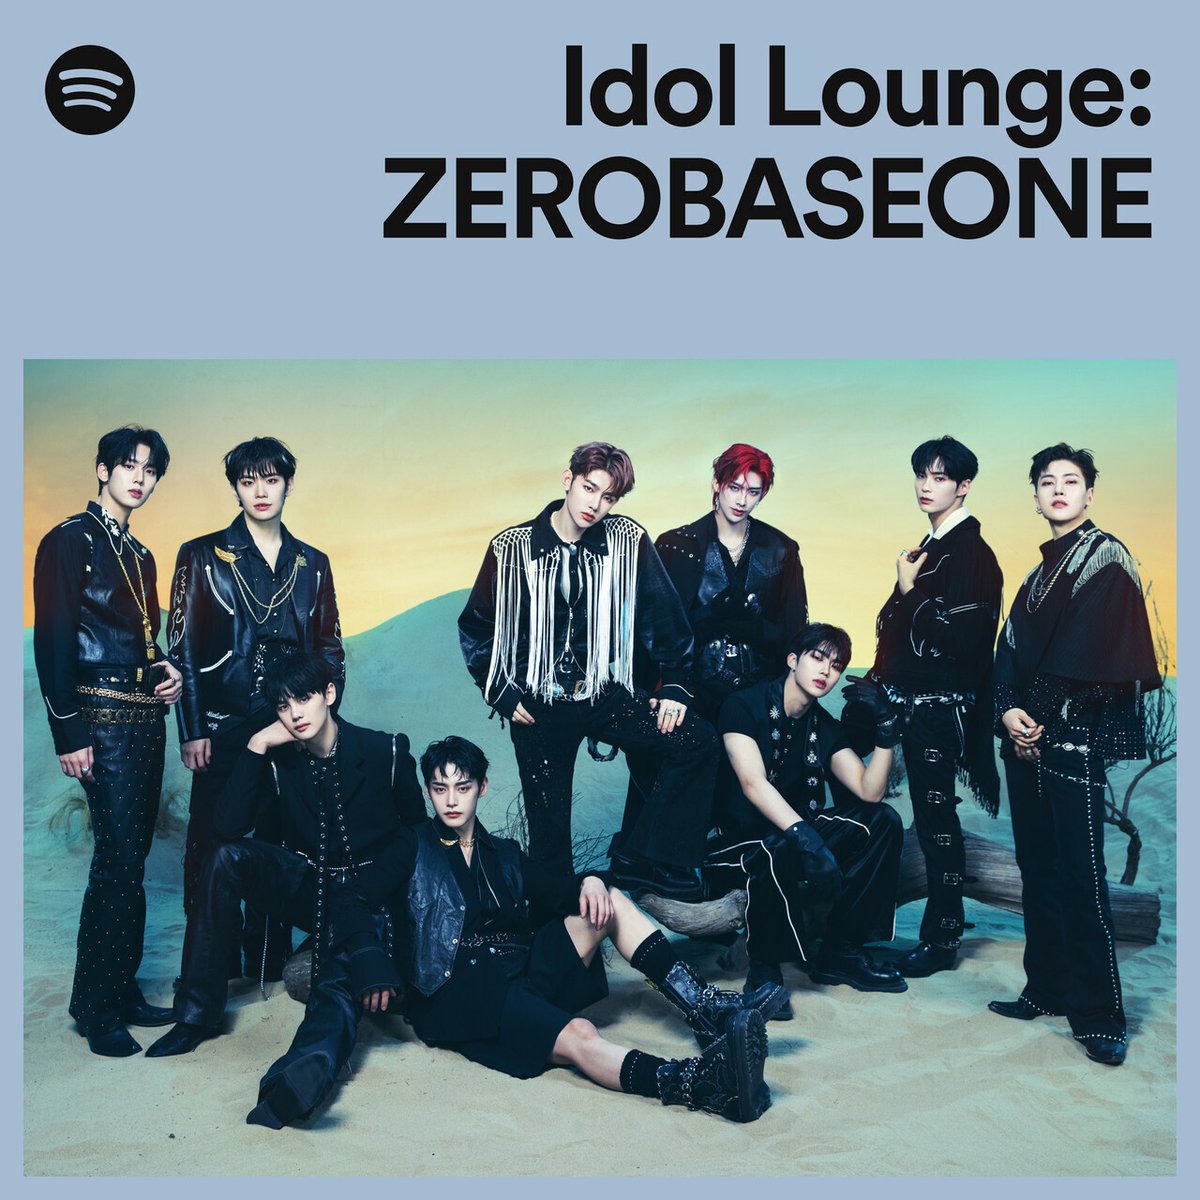 a mix of k-pop hits, iconic ballads and chill indie tunes? jebewon's playlist looks just like ours 😌 listen to @ZB1_official's favorite songs on their Idol Lounge now! spotify.link/IdolLounge-ZB1